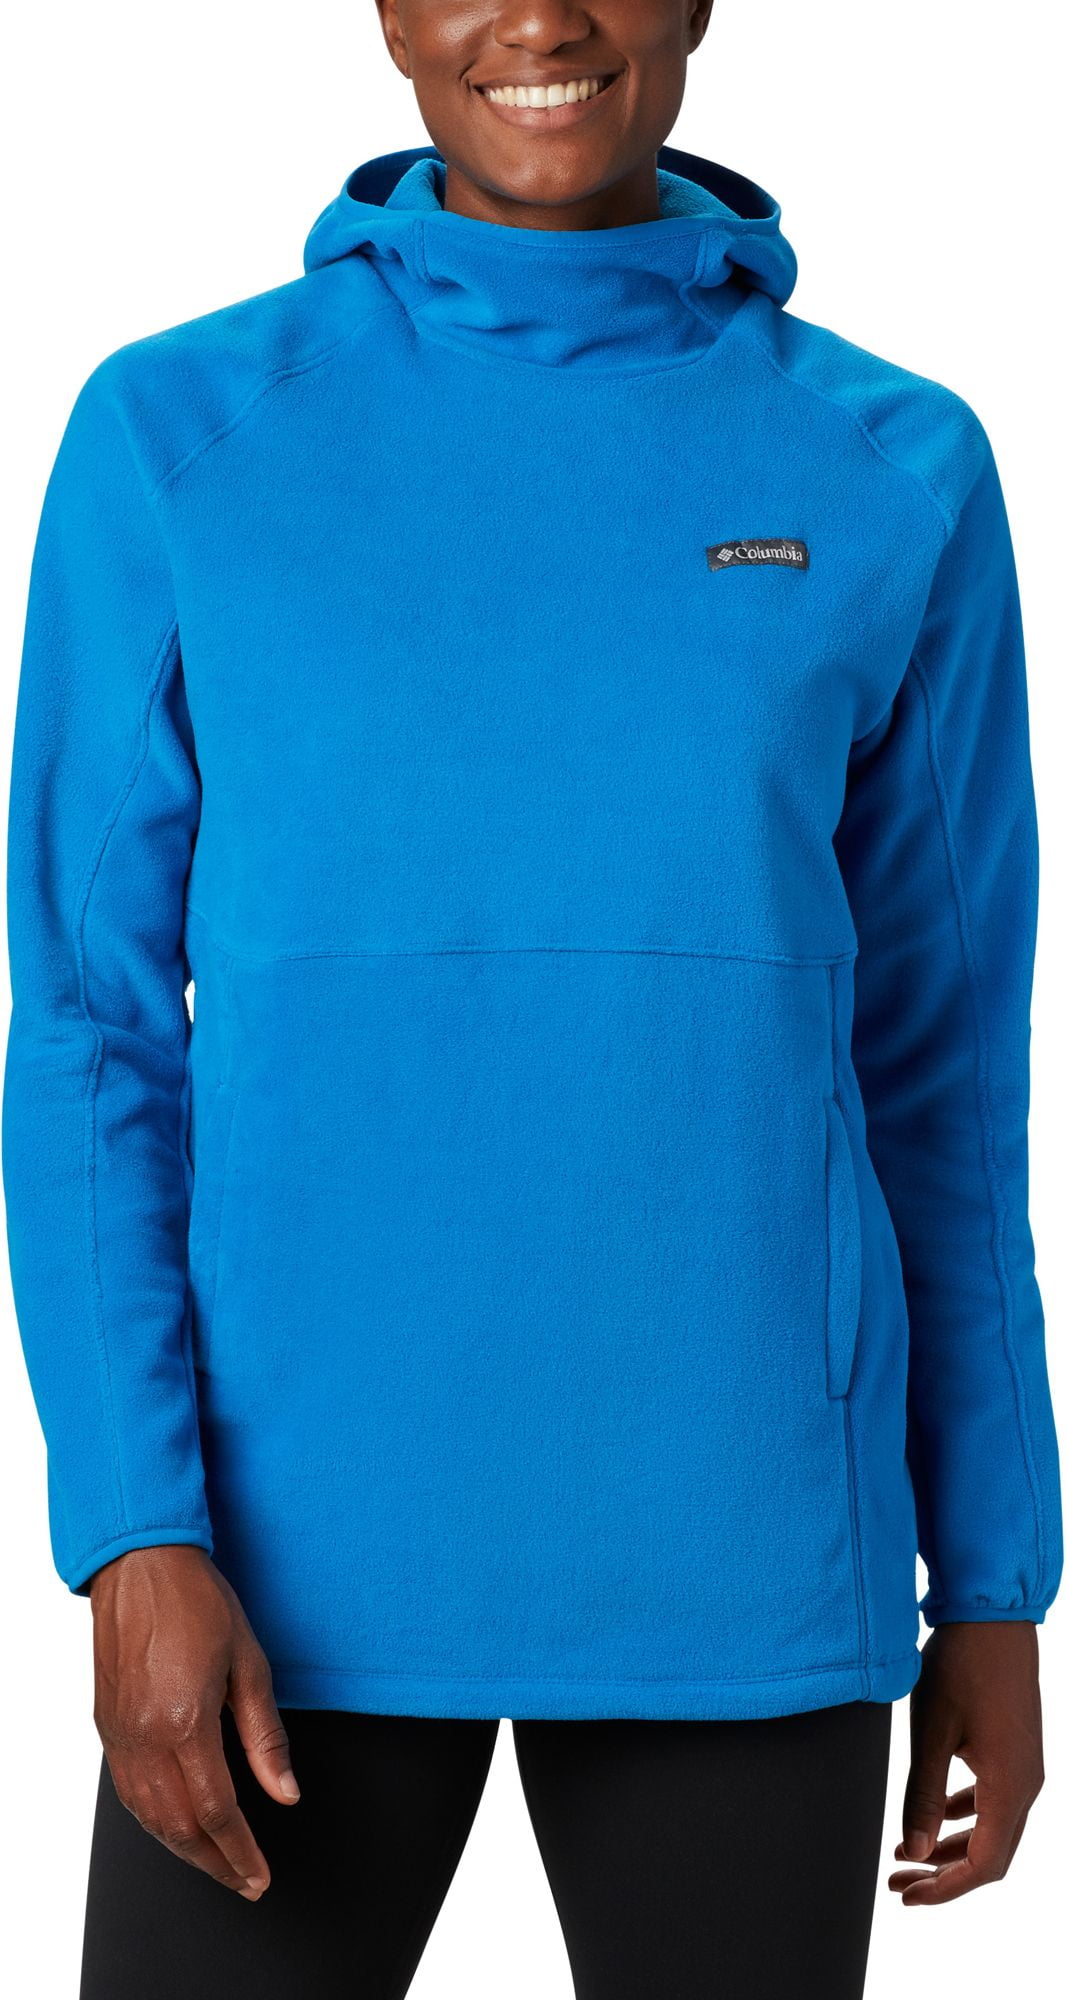 Columbia Womens Extended Basin Trail Fleece Pullover